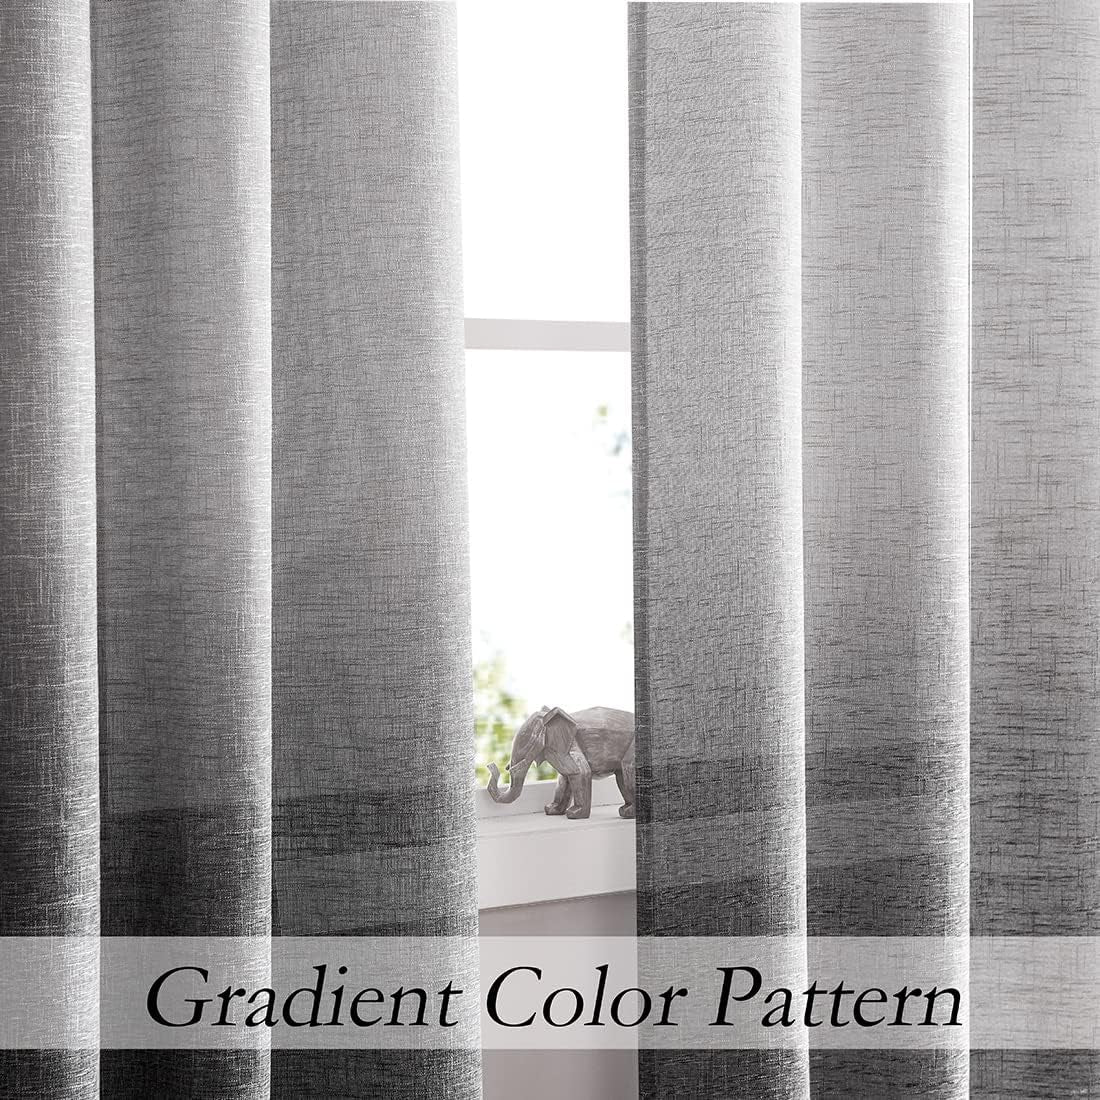 Ombre Window Door Curtain 100" Extra Wide Linen Ombre Gradient Print on Rayon Blend Fabric Treatment for Sliding Patio Door with 14 Grommets, Cream White to Light Gray, 100" X 84", 1 Panel  Central Park   